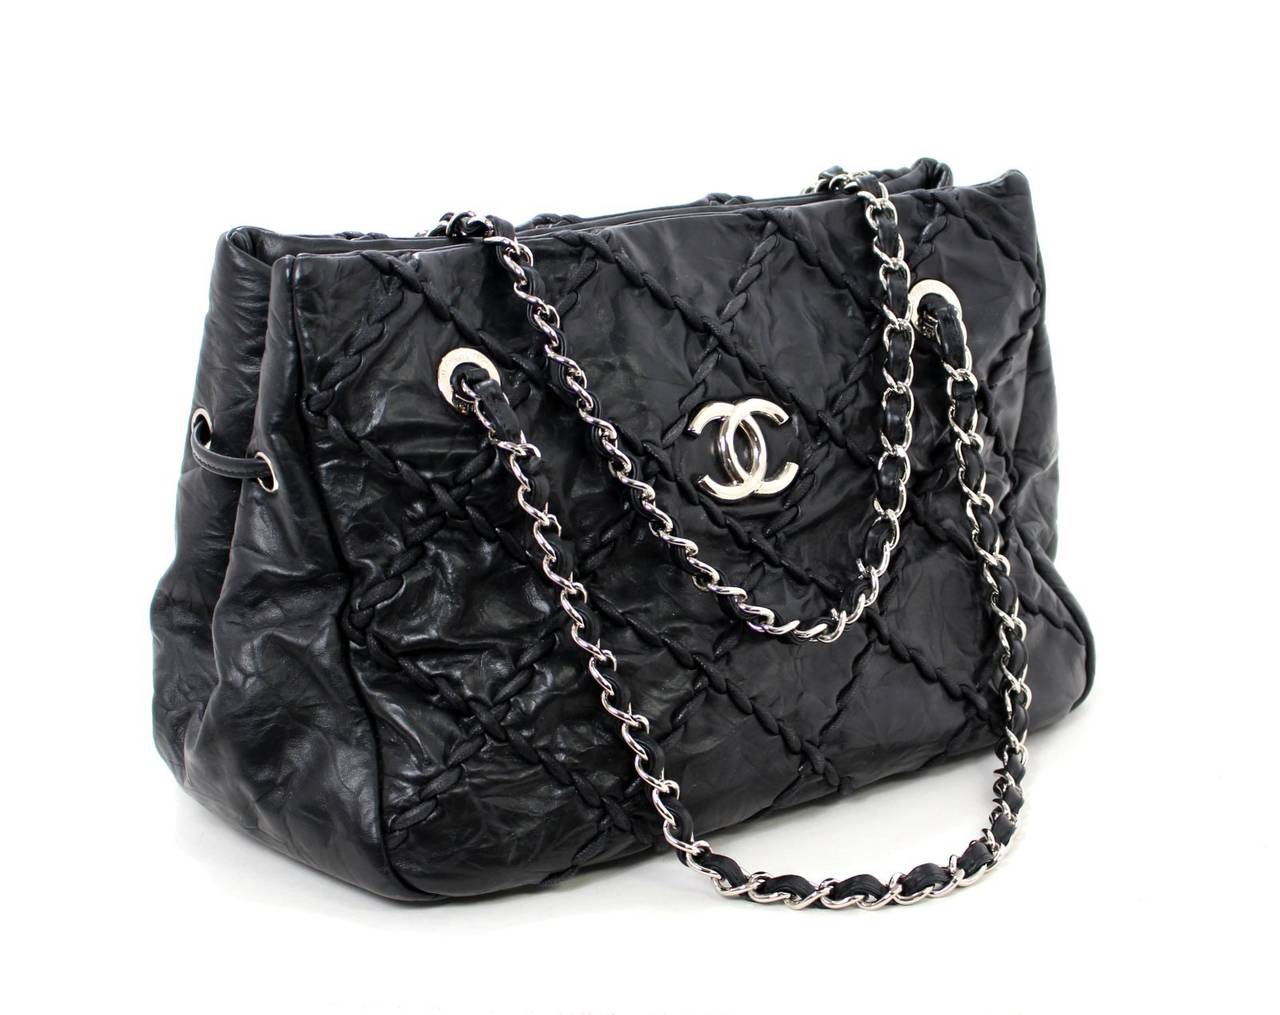 Chanel Ultra Stitch Medium Shopper in Black Leather with Silver HW In Excellent Condition In New York City & Hamptons, NY